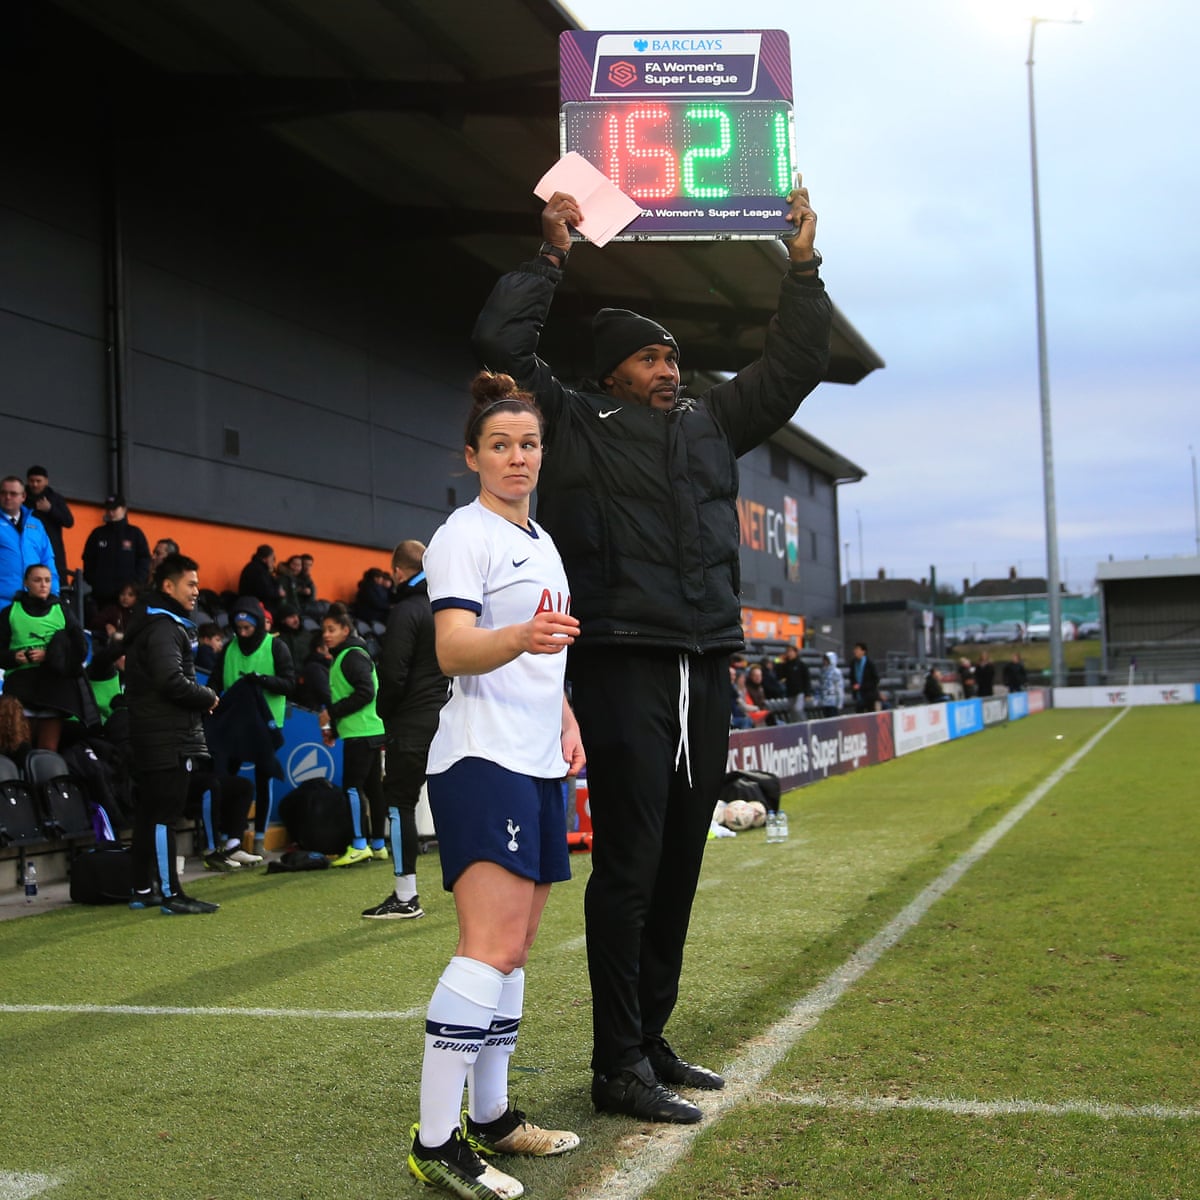 Emma Mitchell's move to Spurs makes sense in weird world of club